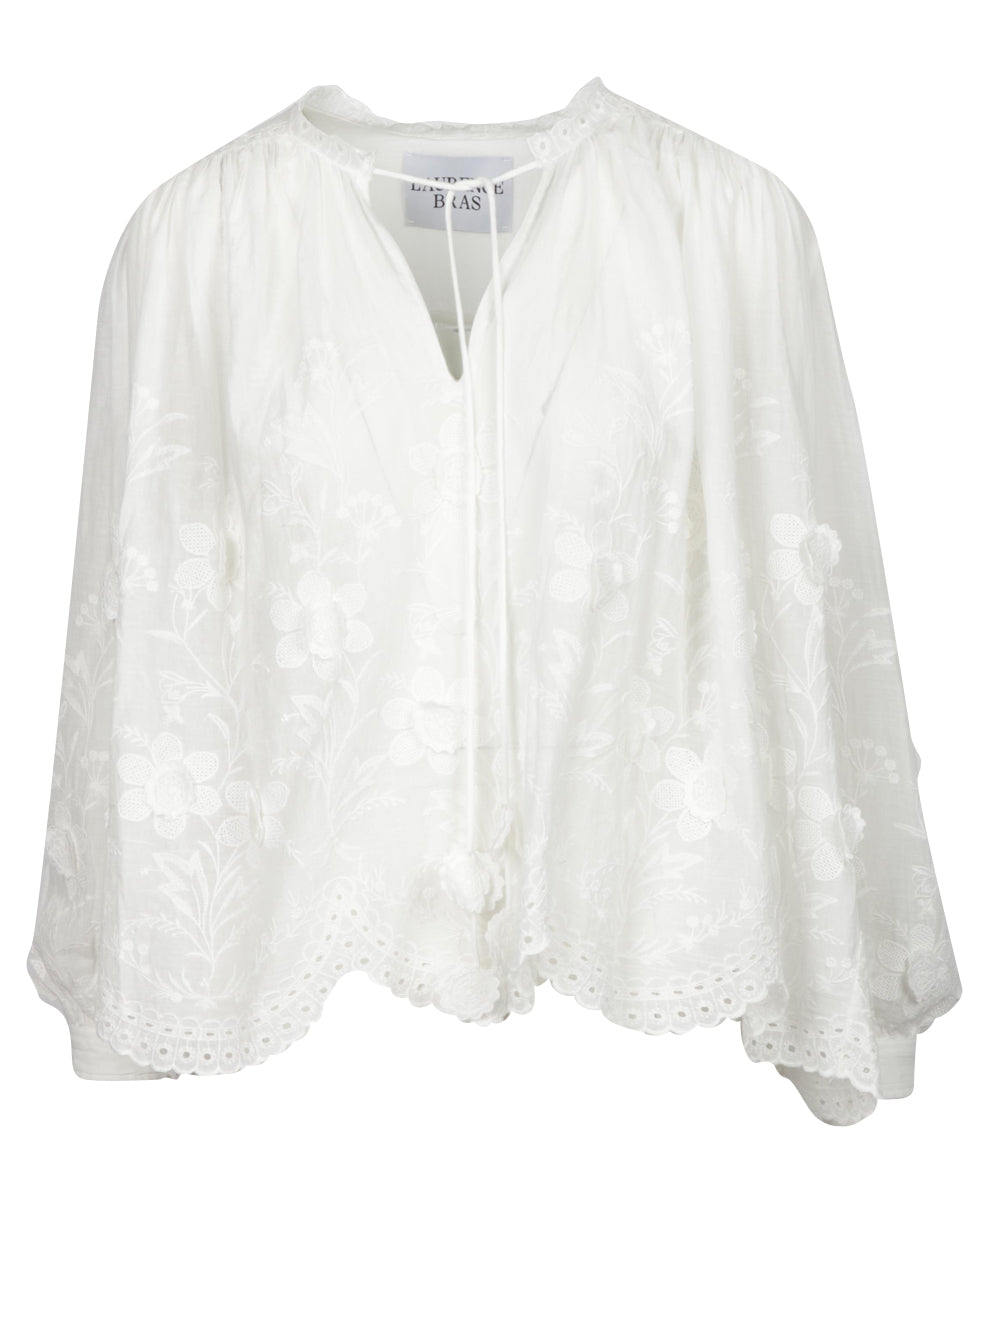 LAURENCE BRAS Blusa Fruity Over in Cotone Bianca con Ricami Bianco